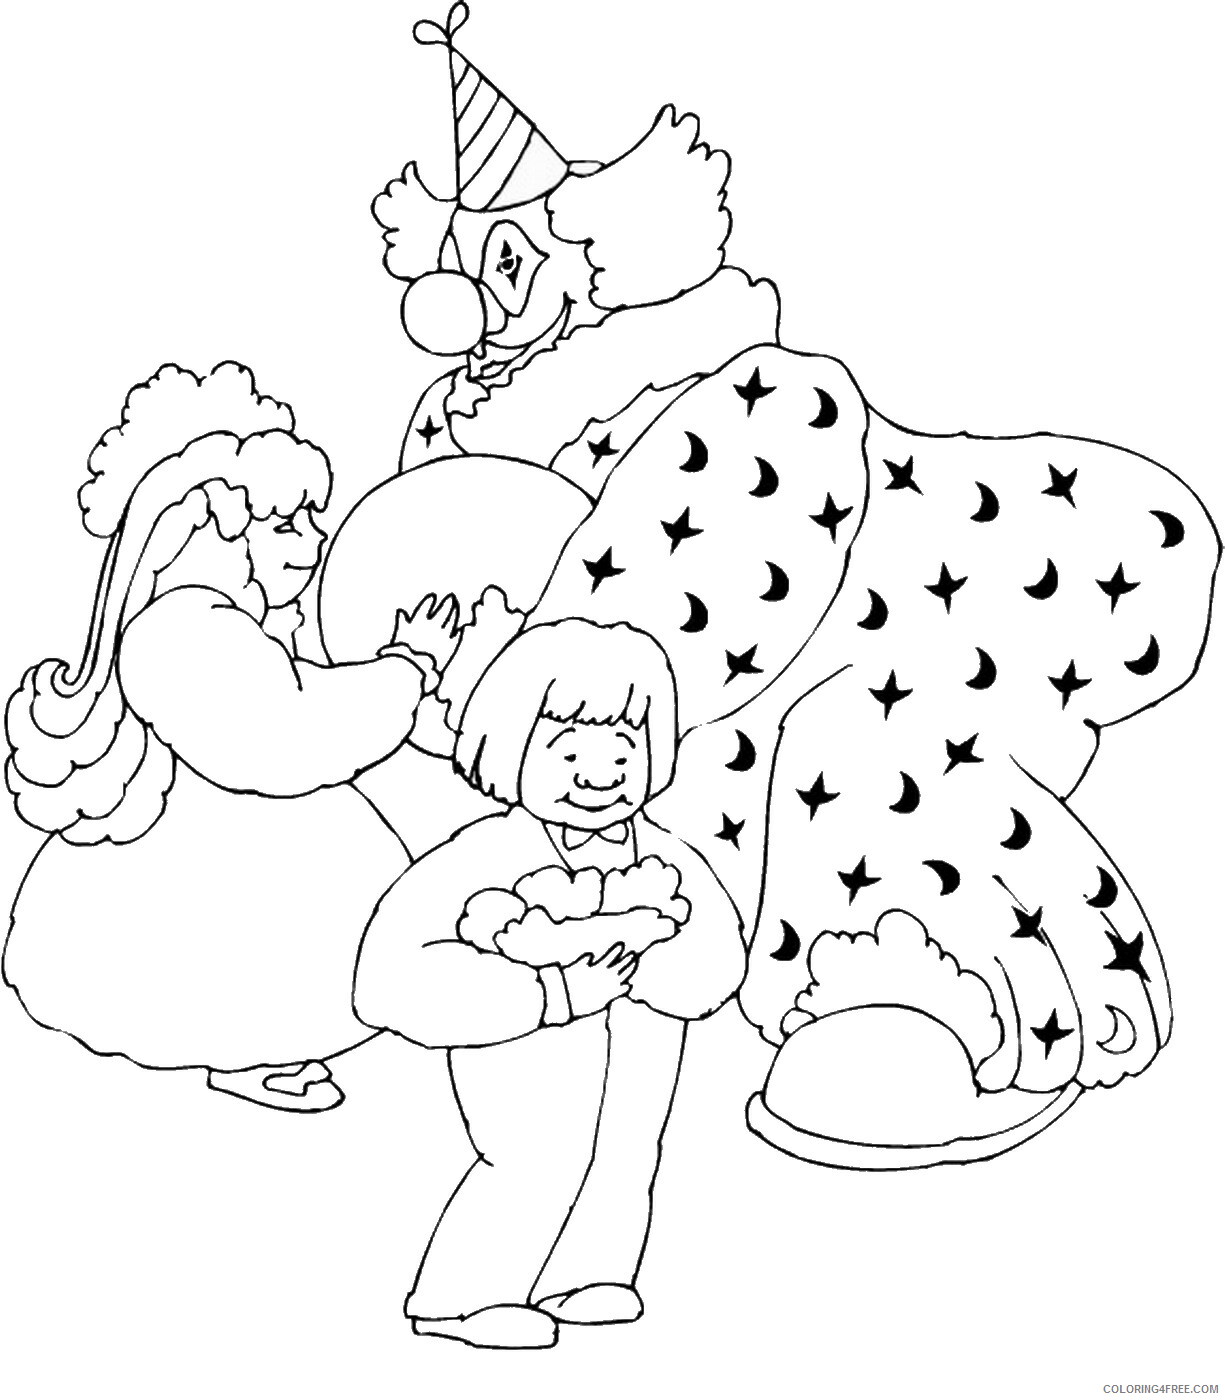 Circus Coloring Pages circus11 Printable 2021 1546 Coloring4free